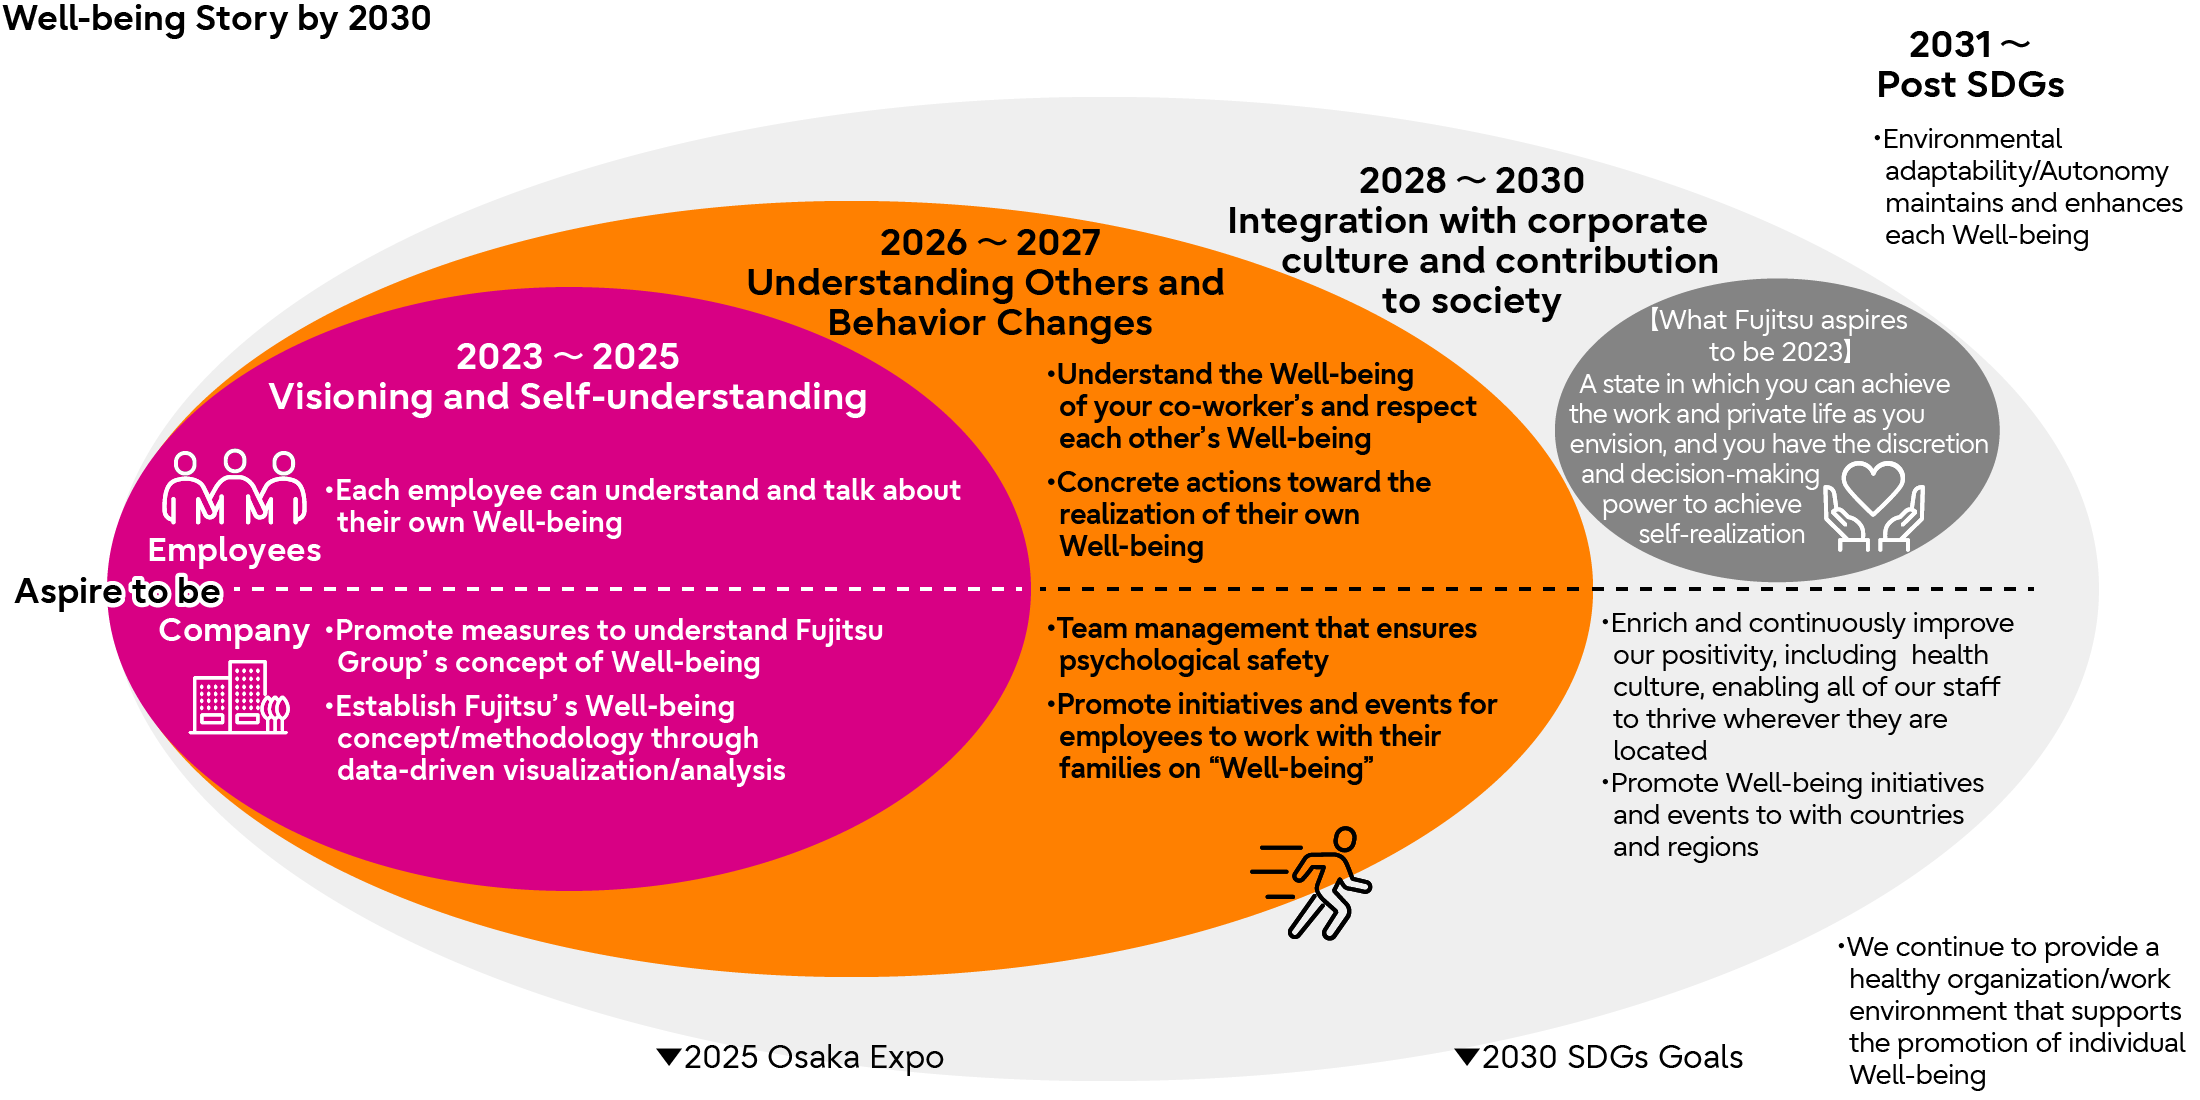 Well-being Story by 2030